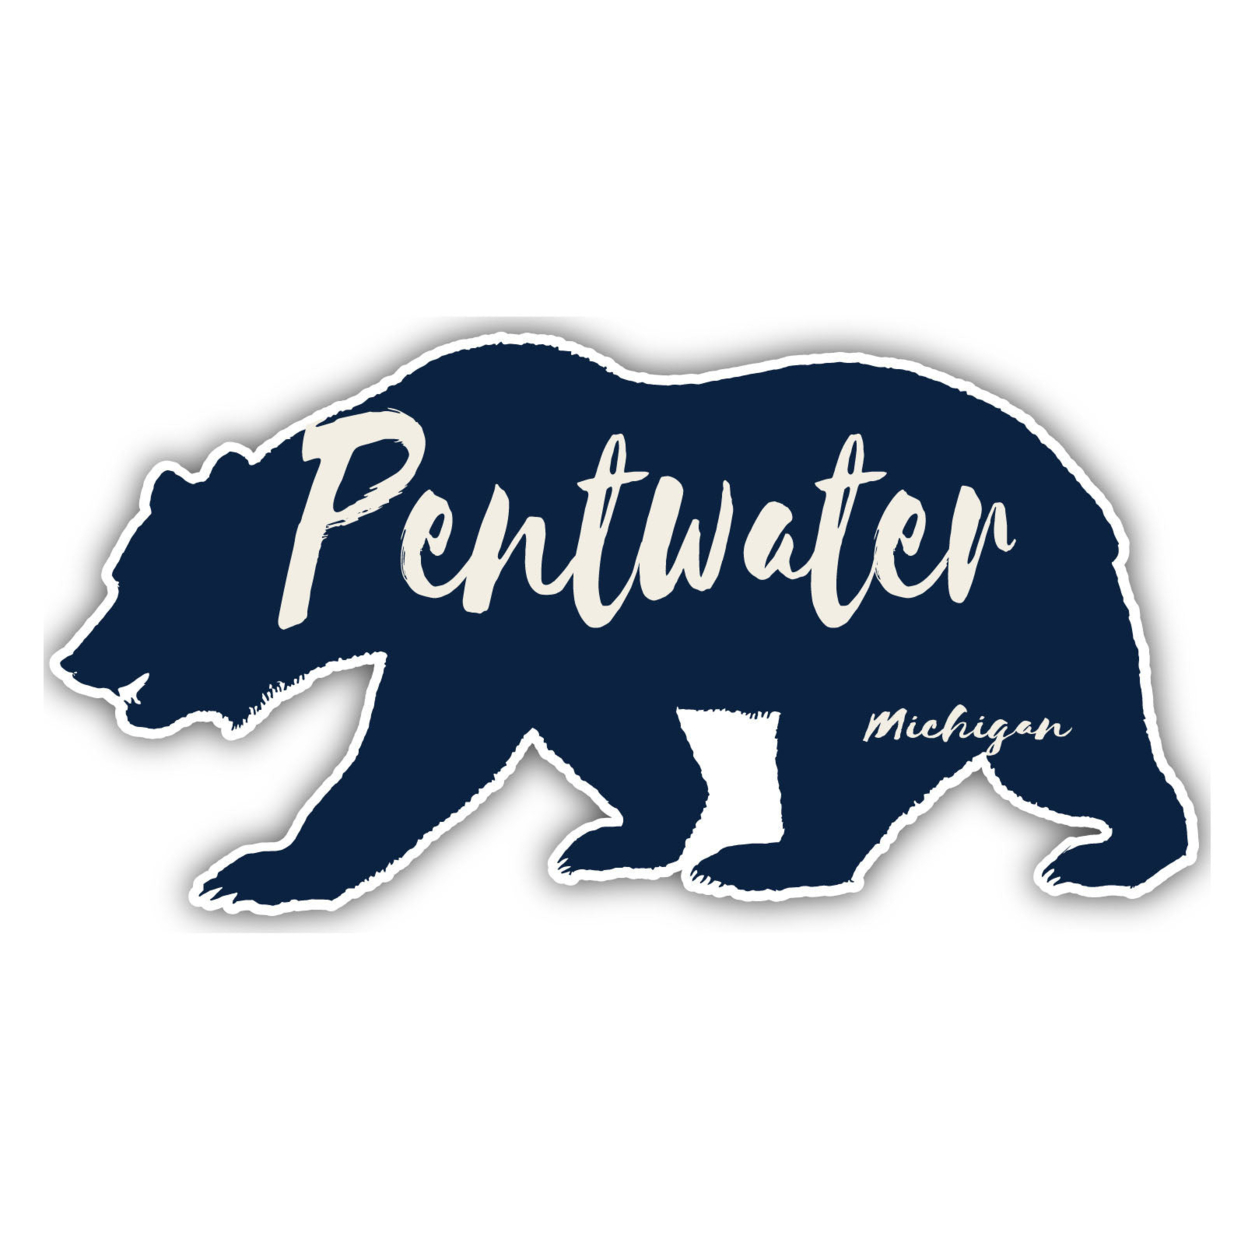 Pentwater Michigan Souvenir Decorative Stickers (Choose Theme And Size) - Single Unit, 2-Inch, Camp Life